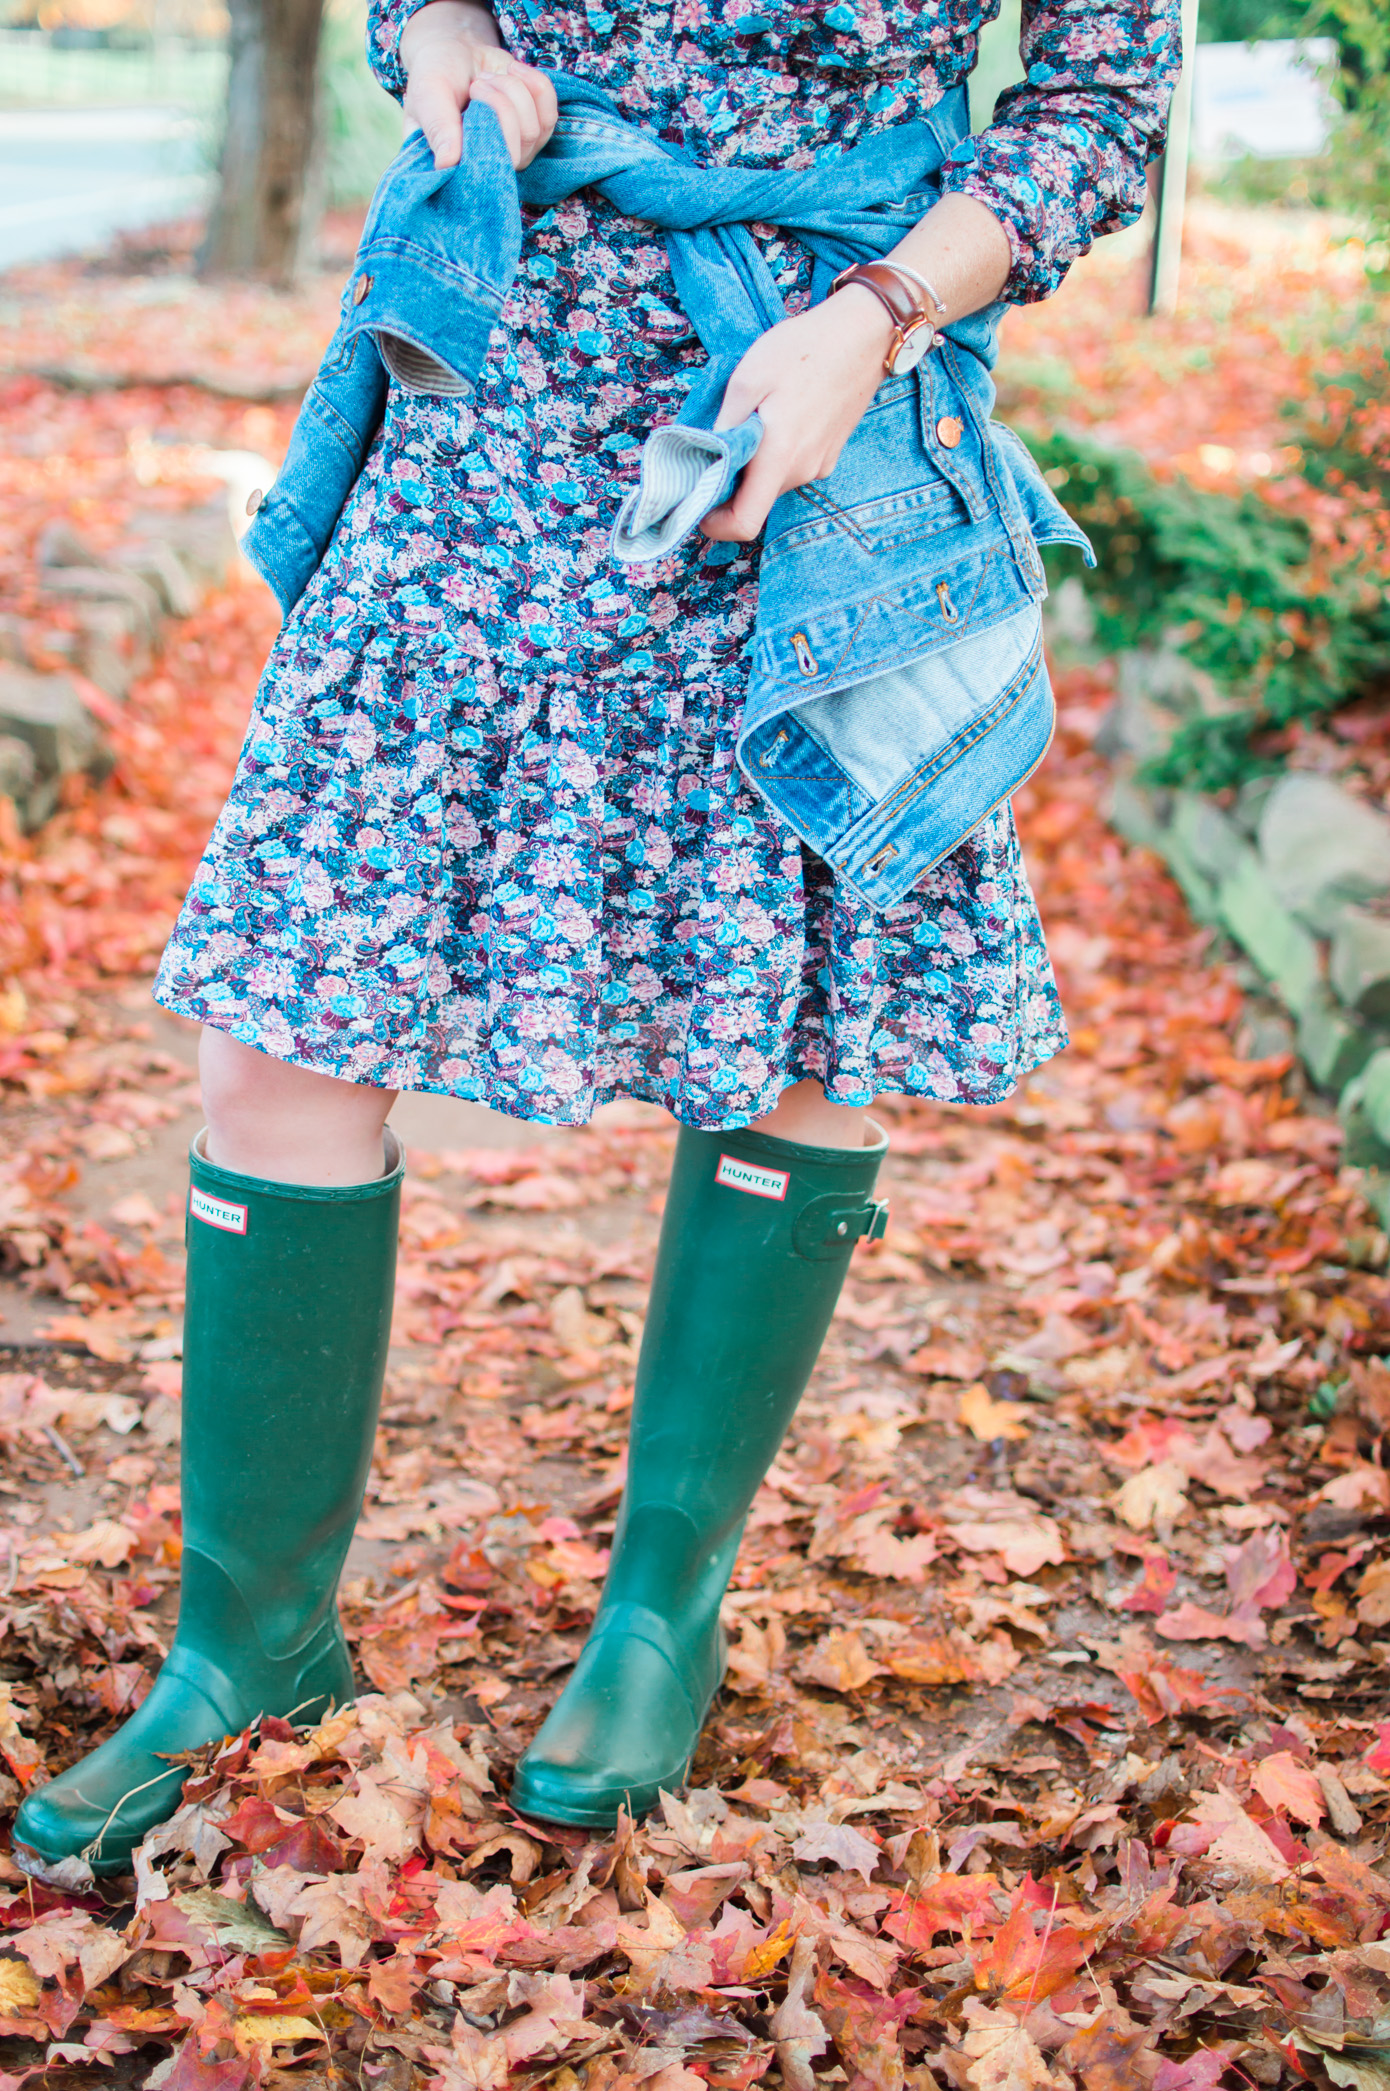 J.Crew Ruffle Hem Dress in Floral Paisley | How to Style Hunter Boots | Louella Reese Life & Style Blog